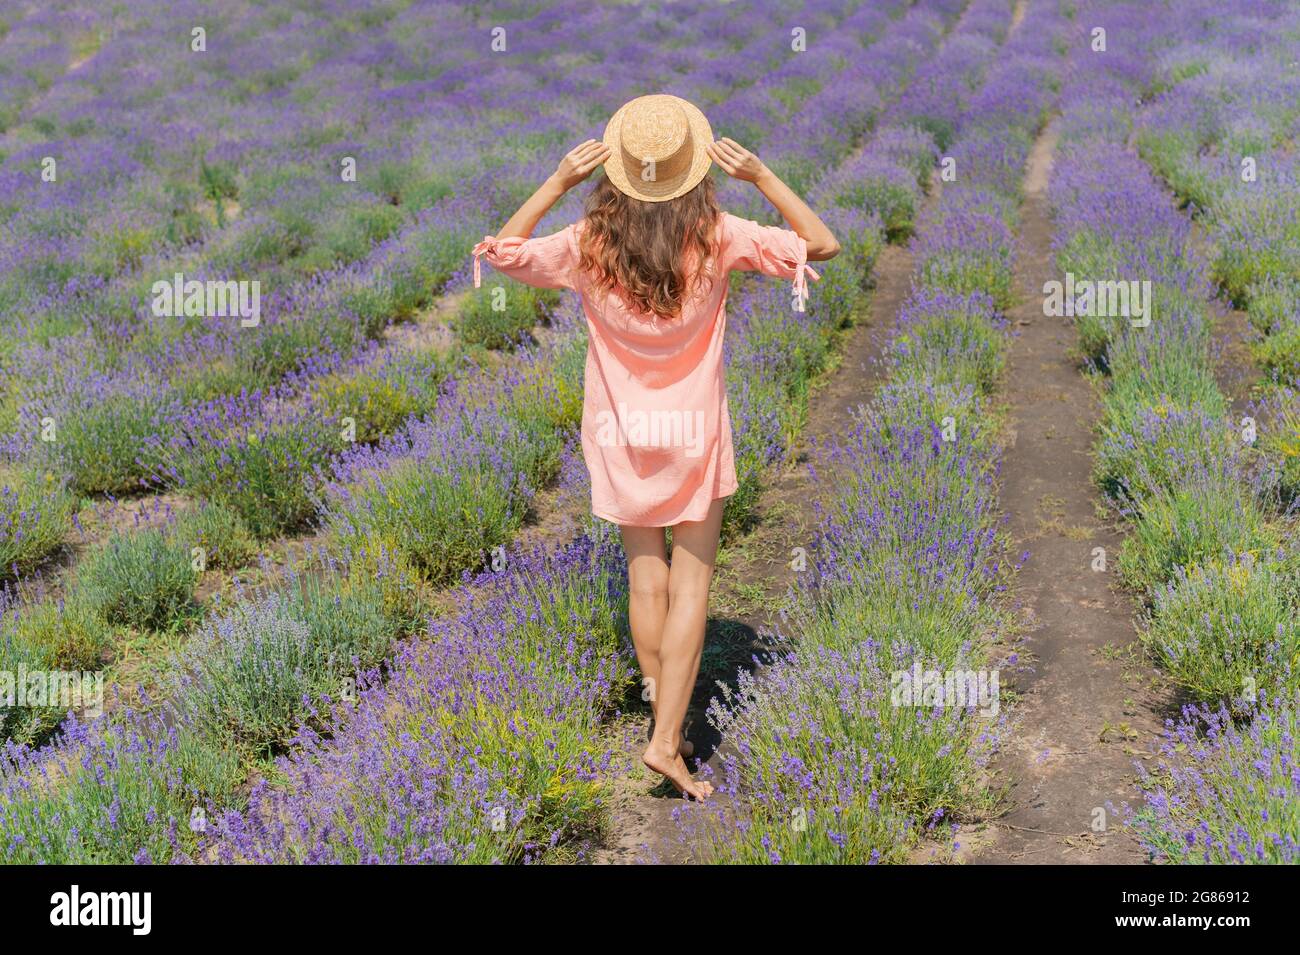 Young woman with pink dress and hat enjoying the beauty and fragrance of a filed of lavender in bloom Stock Photo